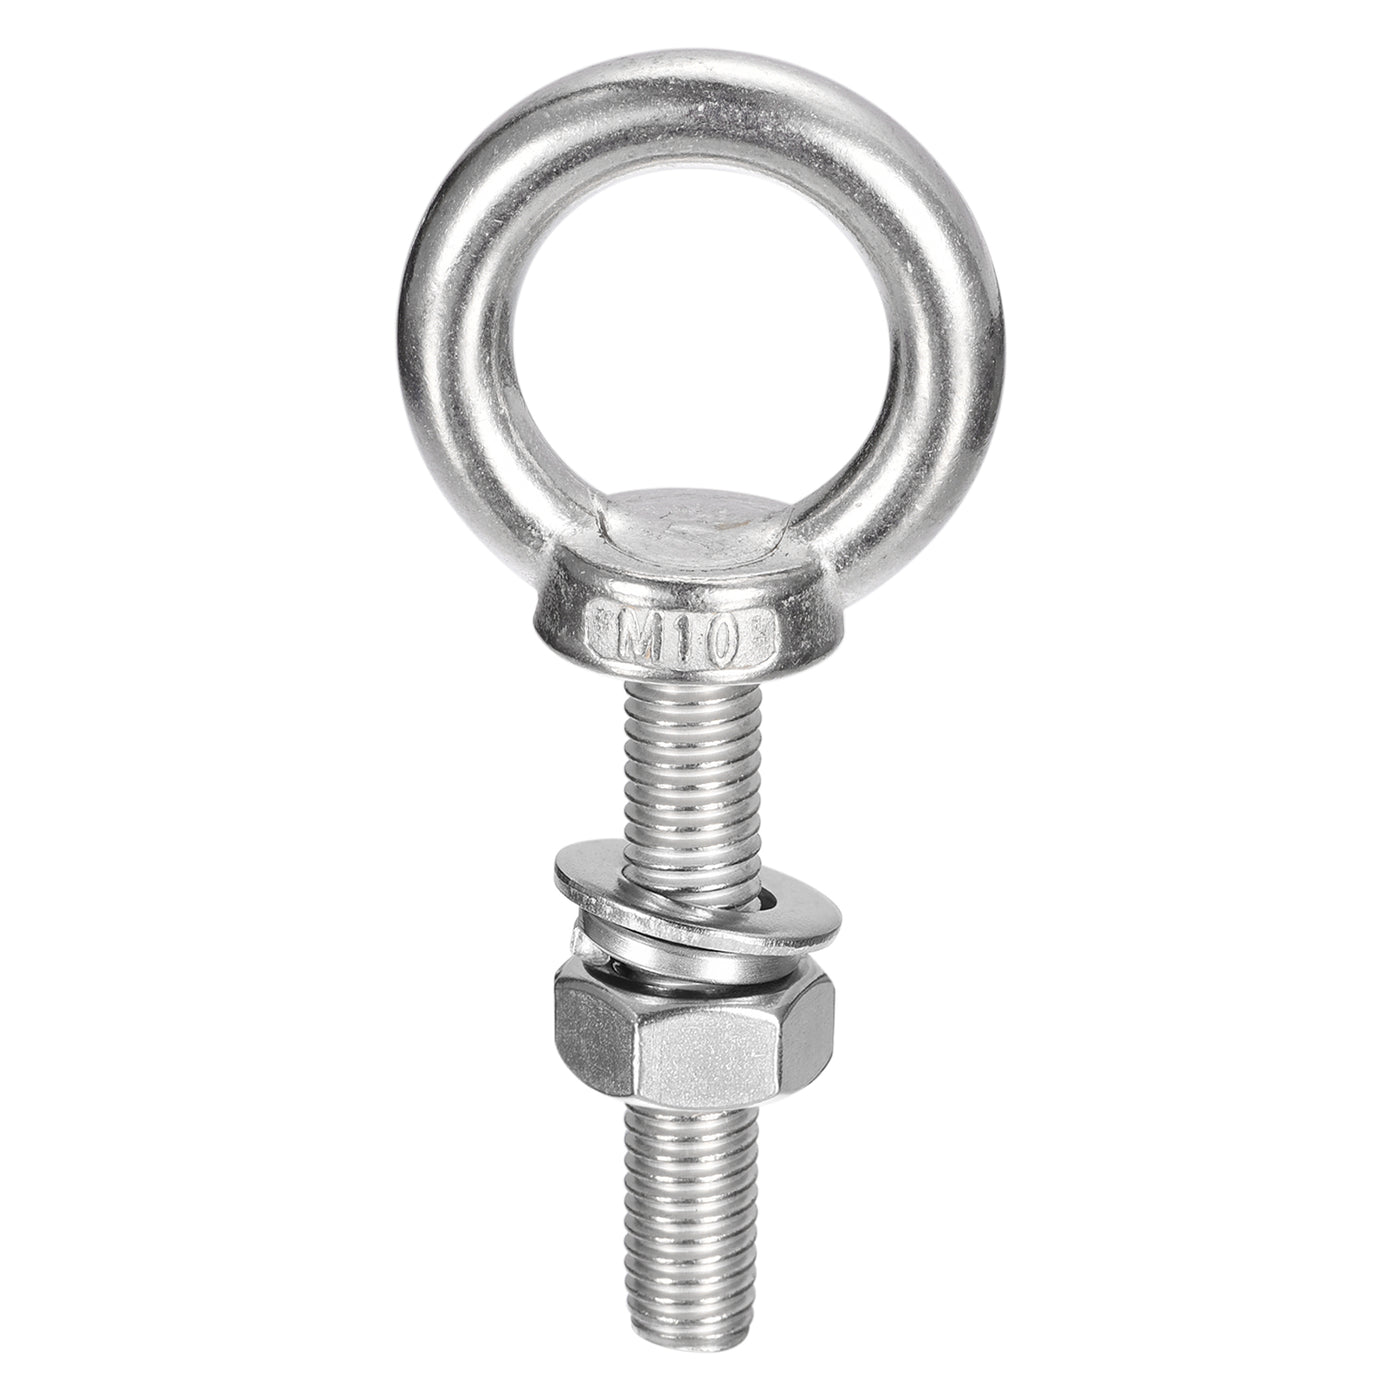 uxcell Uxcell Lifting Eye Bolt, 1 Set M10x50mm Eye Bolt with Nut Washer 304 Stainless Steel